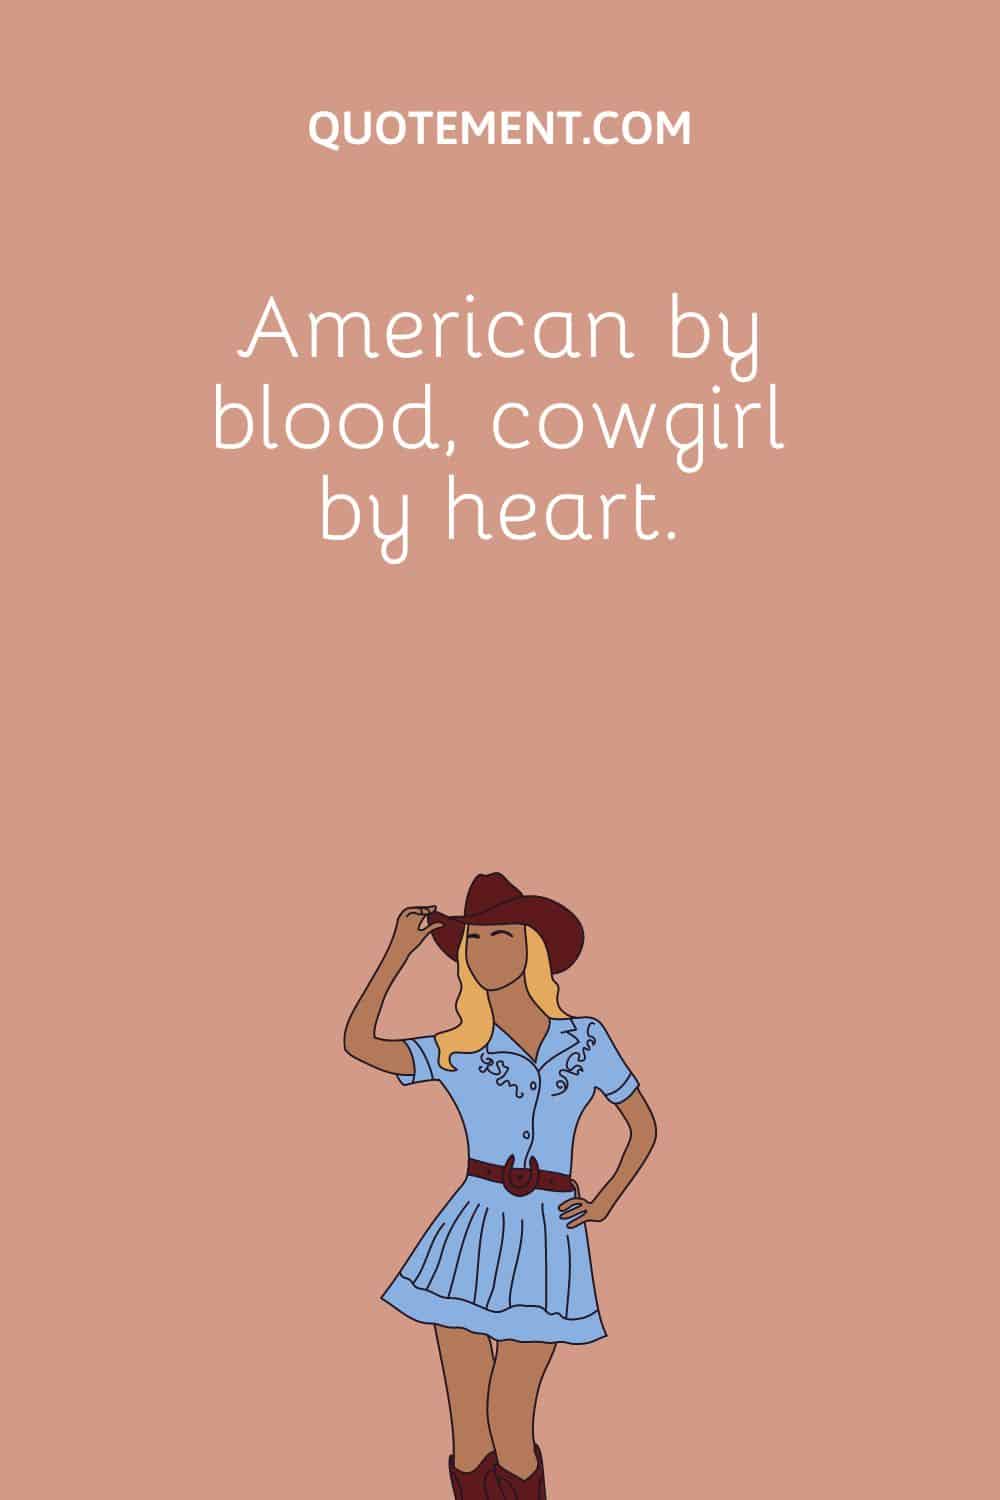 a cowgirl in blue dress representing the greatest cowgirl caption
